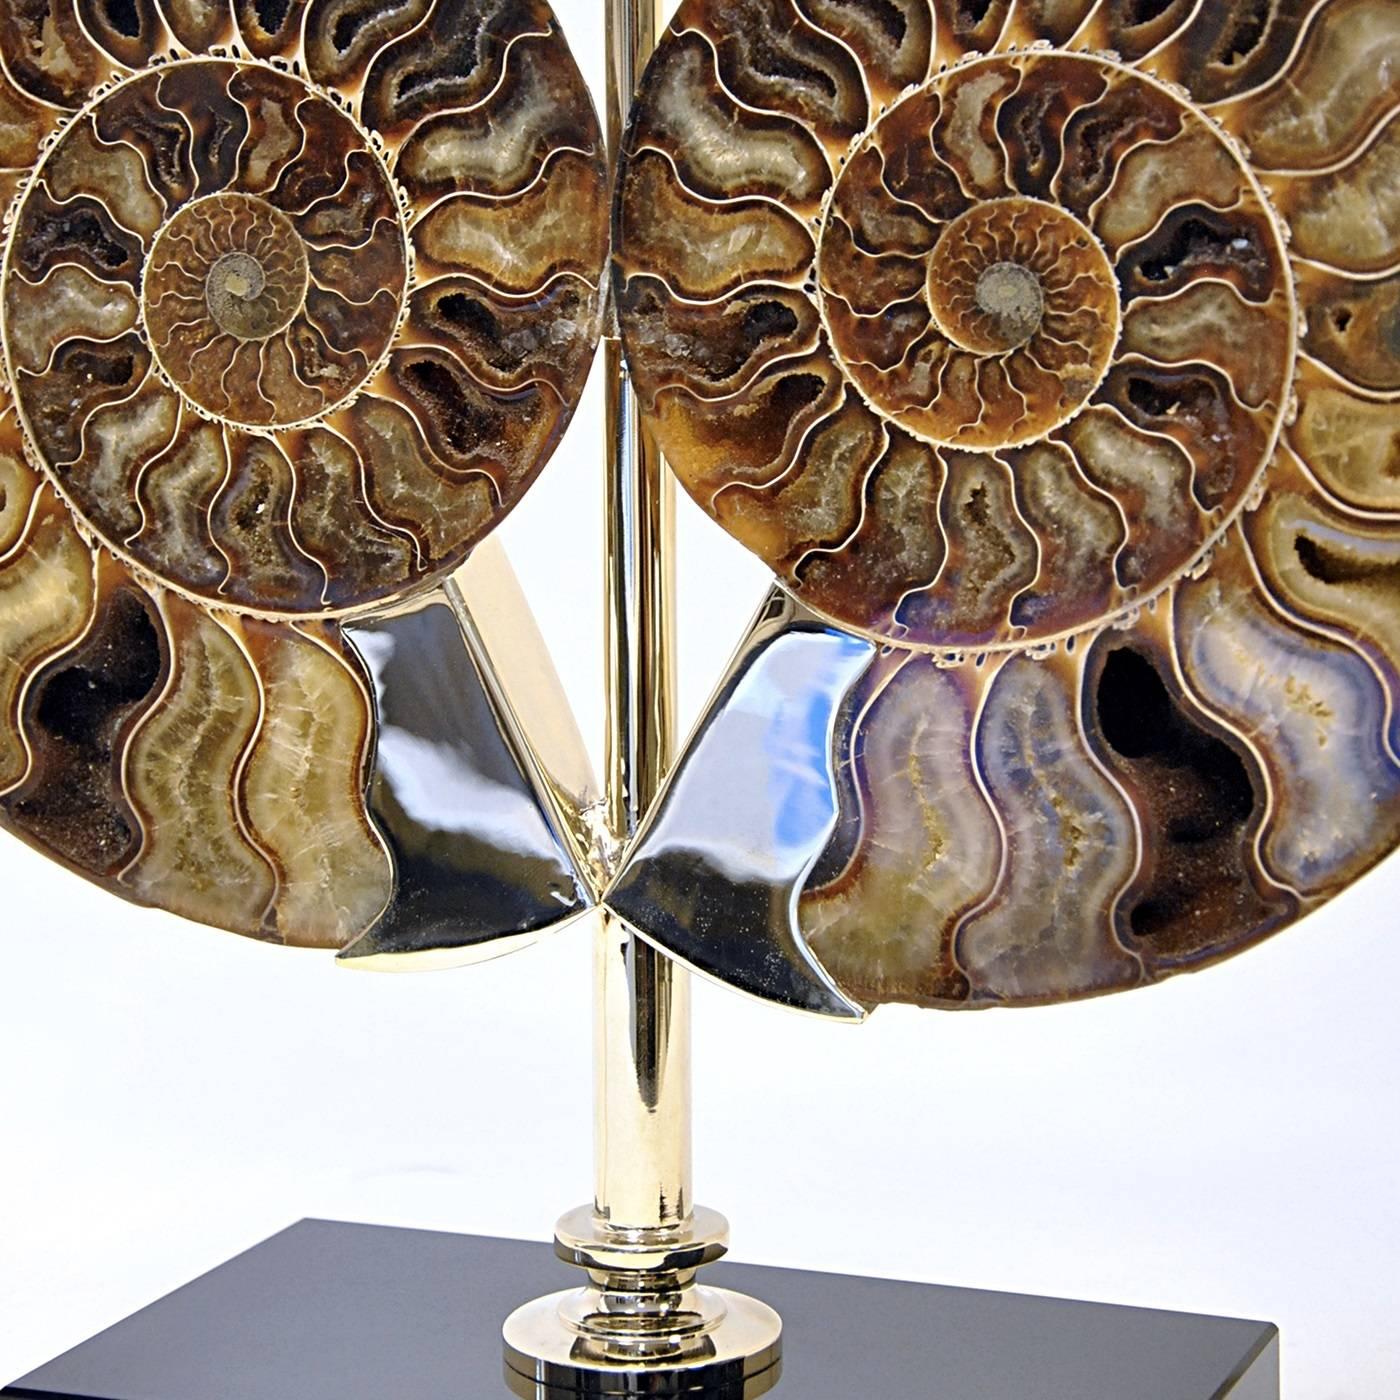 This lamp combines hand-craftsmanship with the beauty of nature by combining a pair of ammonite fossils (the shells of extinct cephalopods) with a man-made, nickel-plated brass base, designed with a simple construction so as not to interfere with